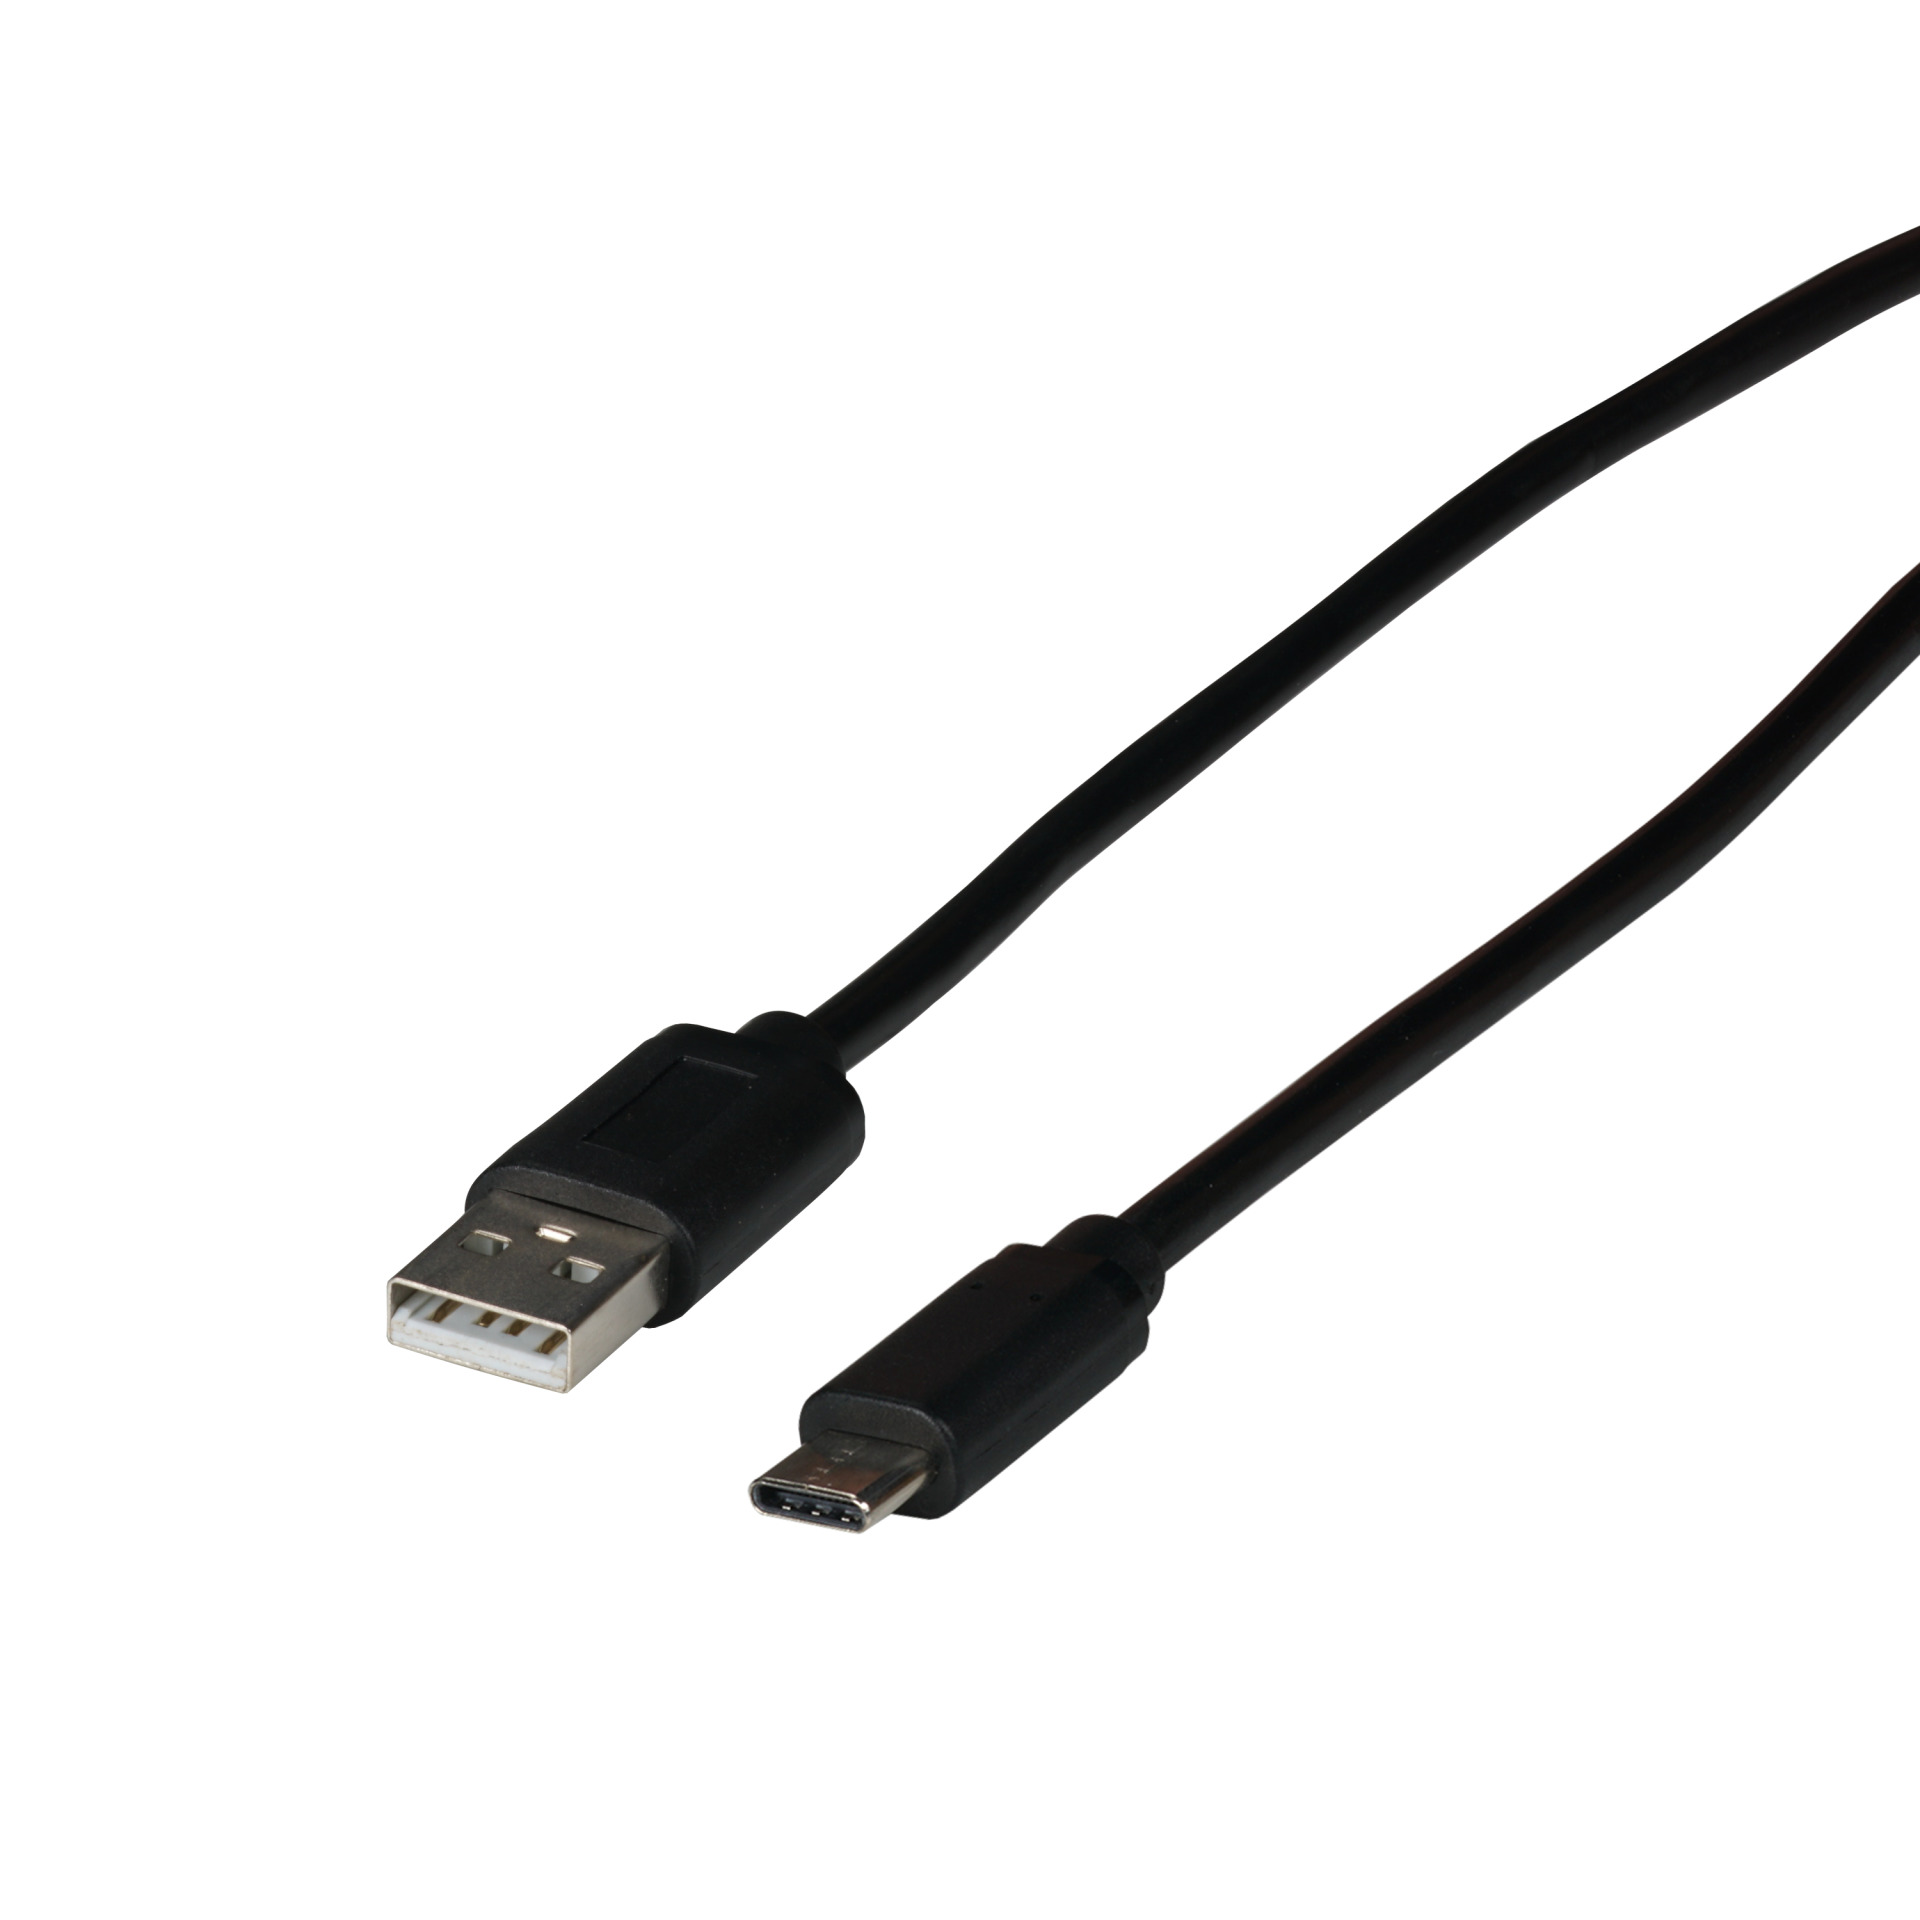 USB 2.0 Cable, Type-C m - Type-A m, 0.5m